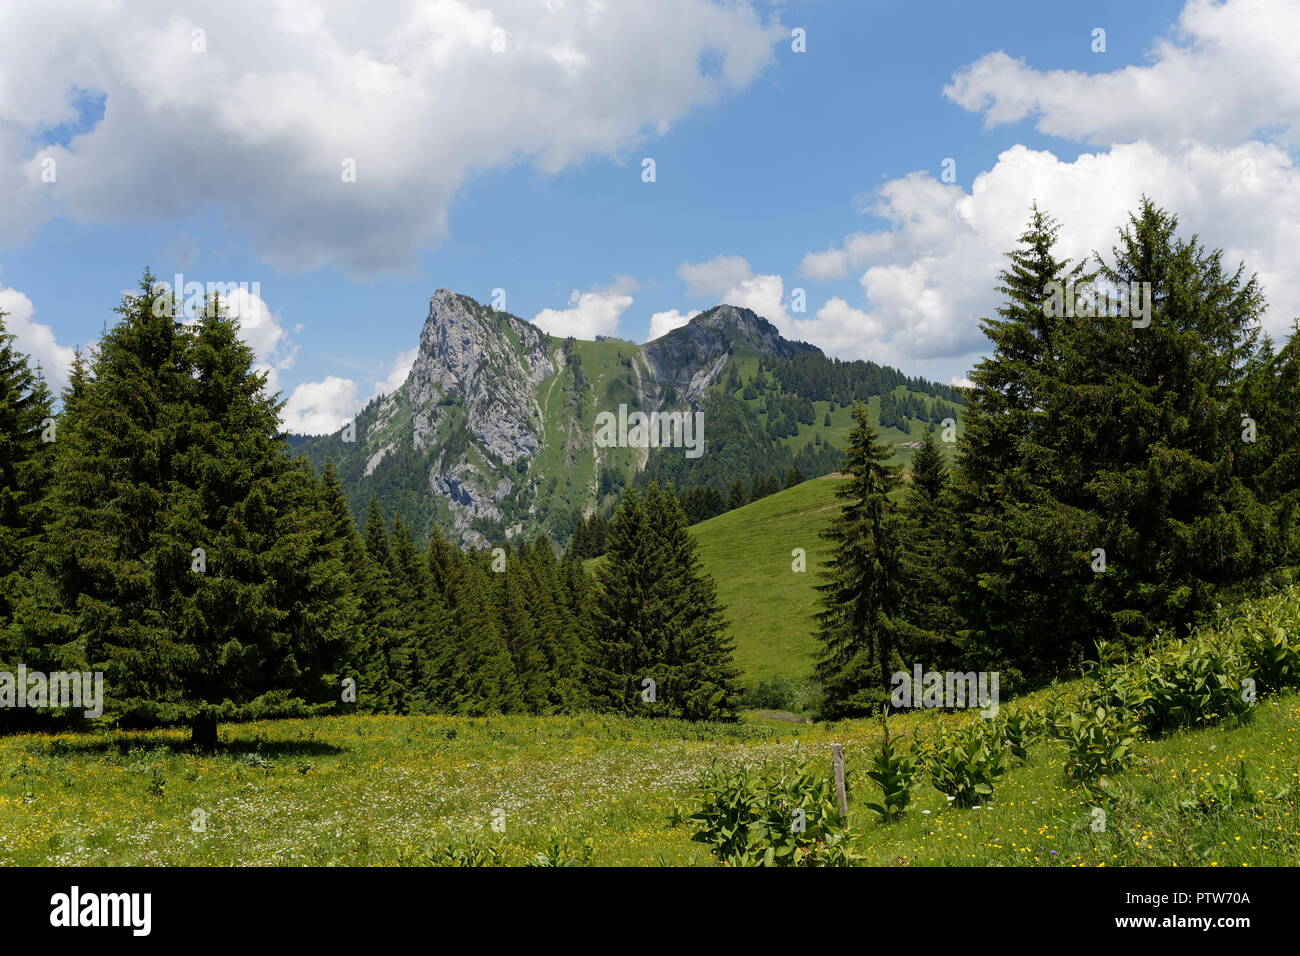 Landscape view of a valley and mountain from one of the trails around Montmin above Lake Annecy France Stock Photo